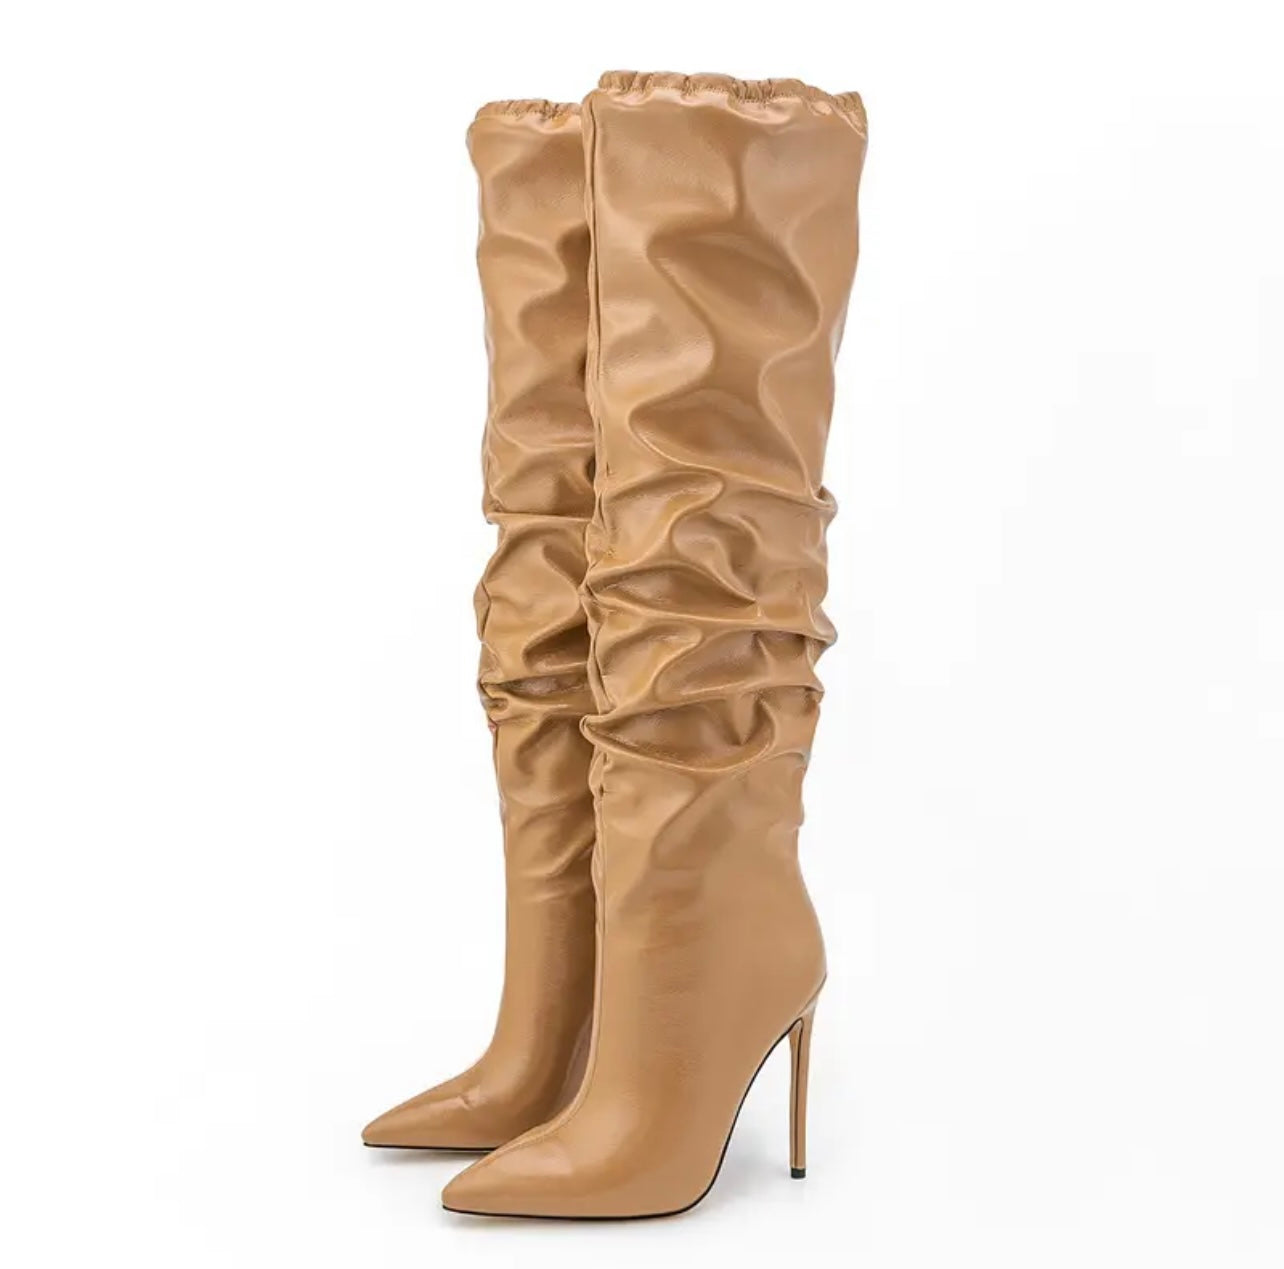 Staying Fabulous Knee High Boots Comes In Other Gorgeous Colors